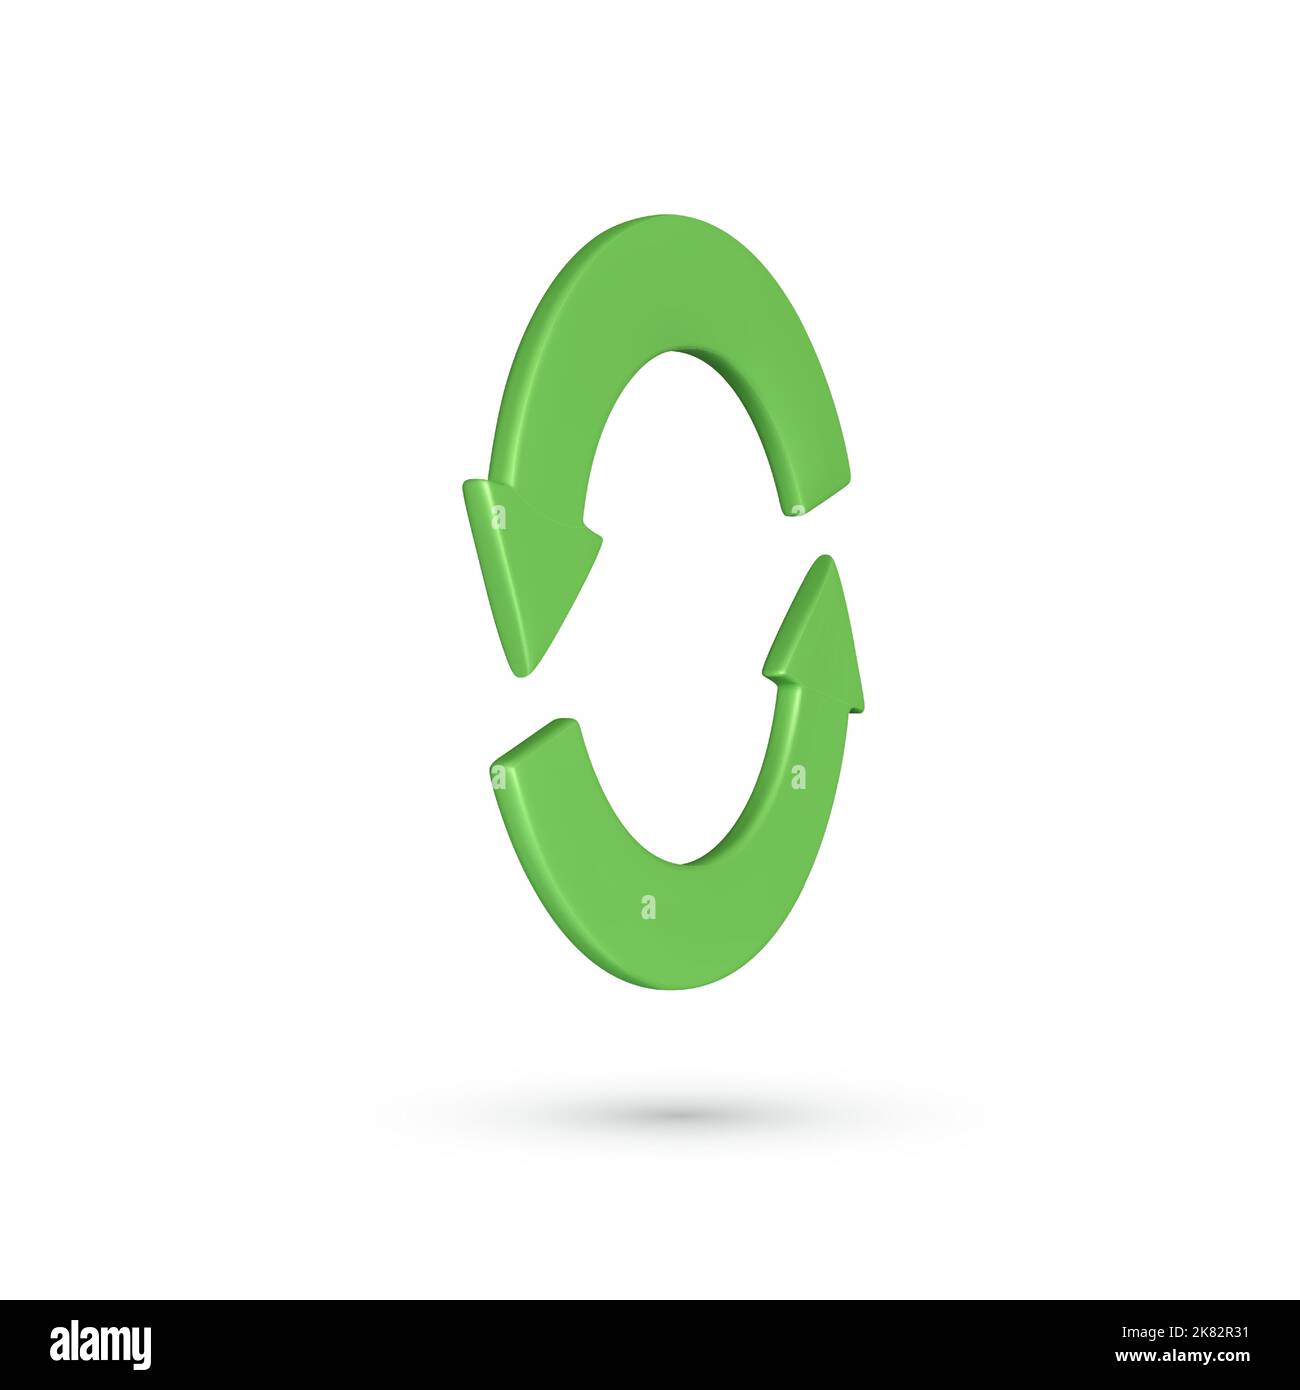 Green arrow refresh icon isolated on white background. Reload symbol for web or app interface. Rotation arrows in a circle sign. Vector illustration Stock Vector